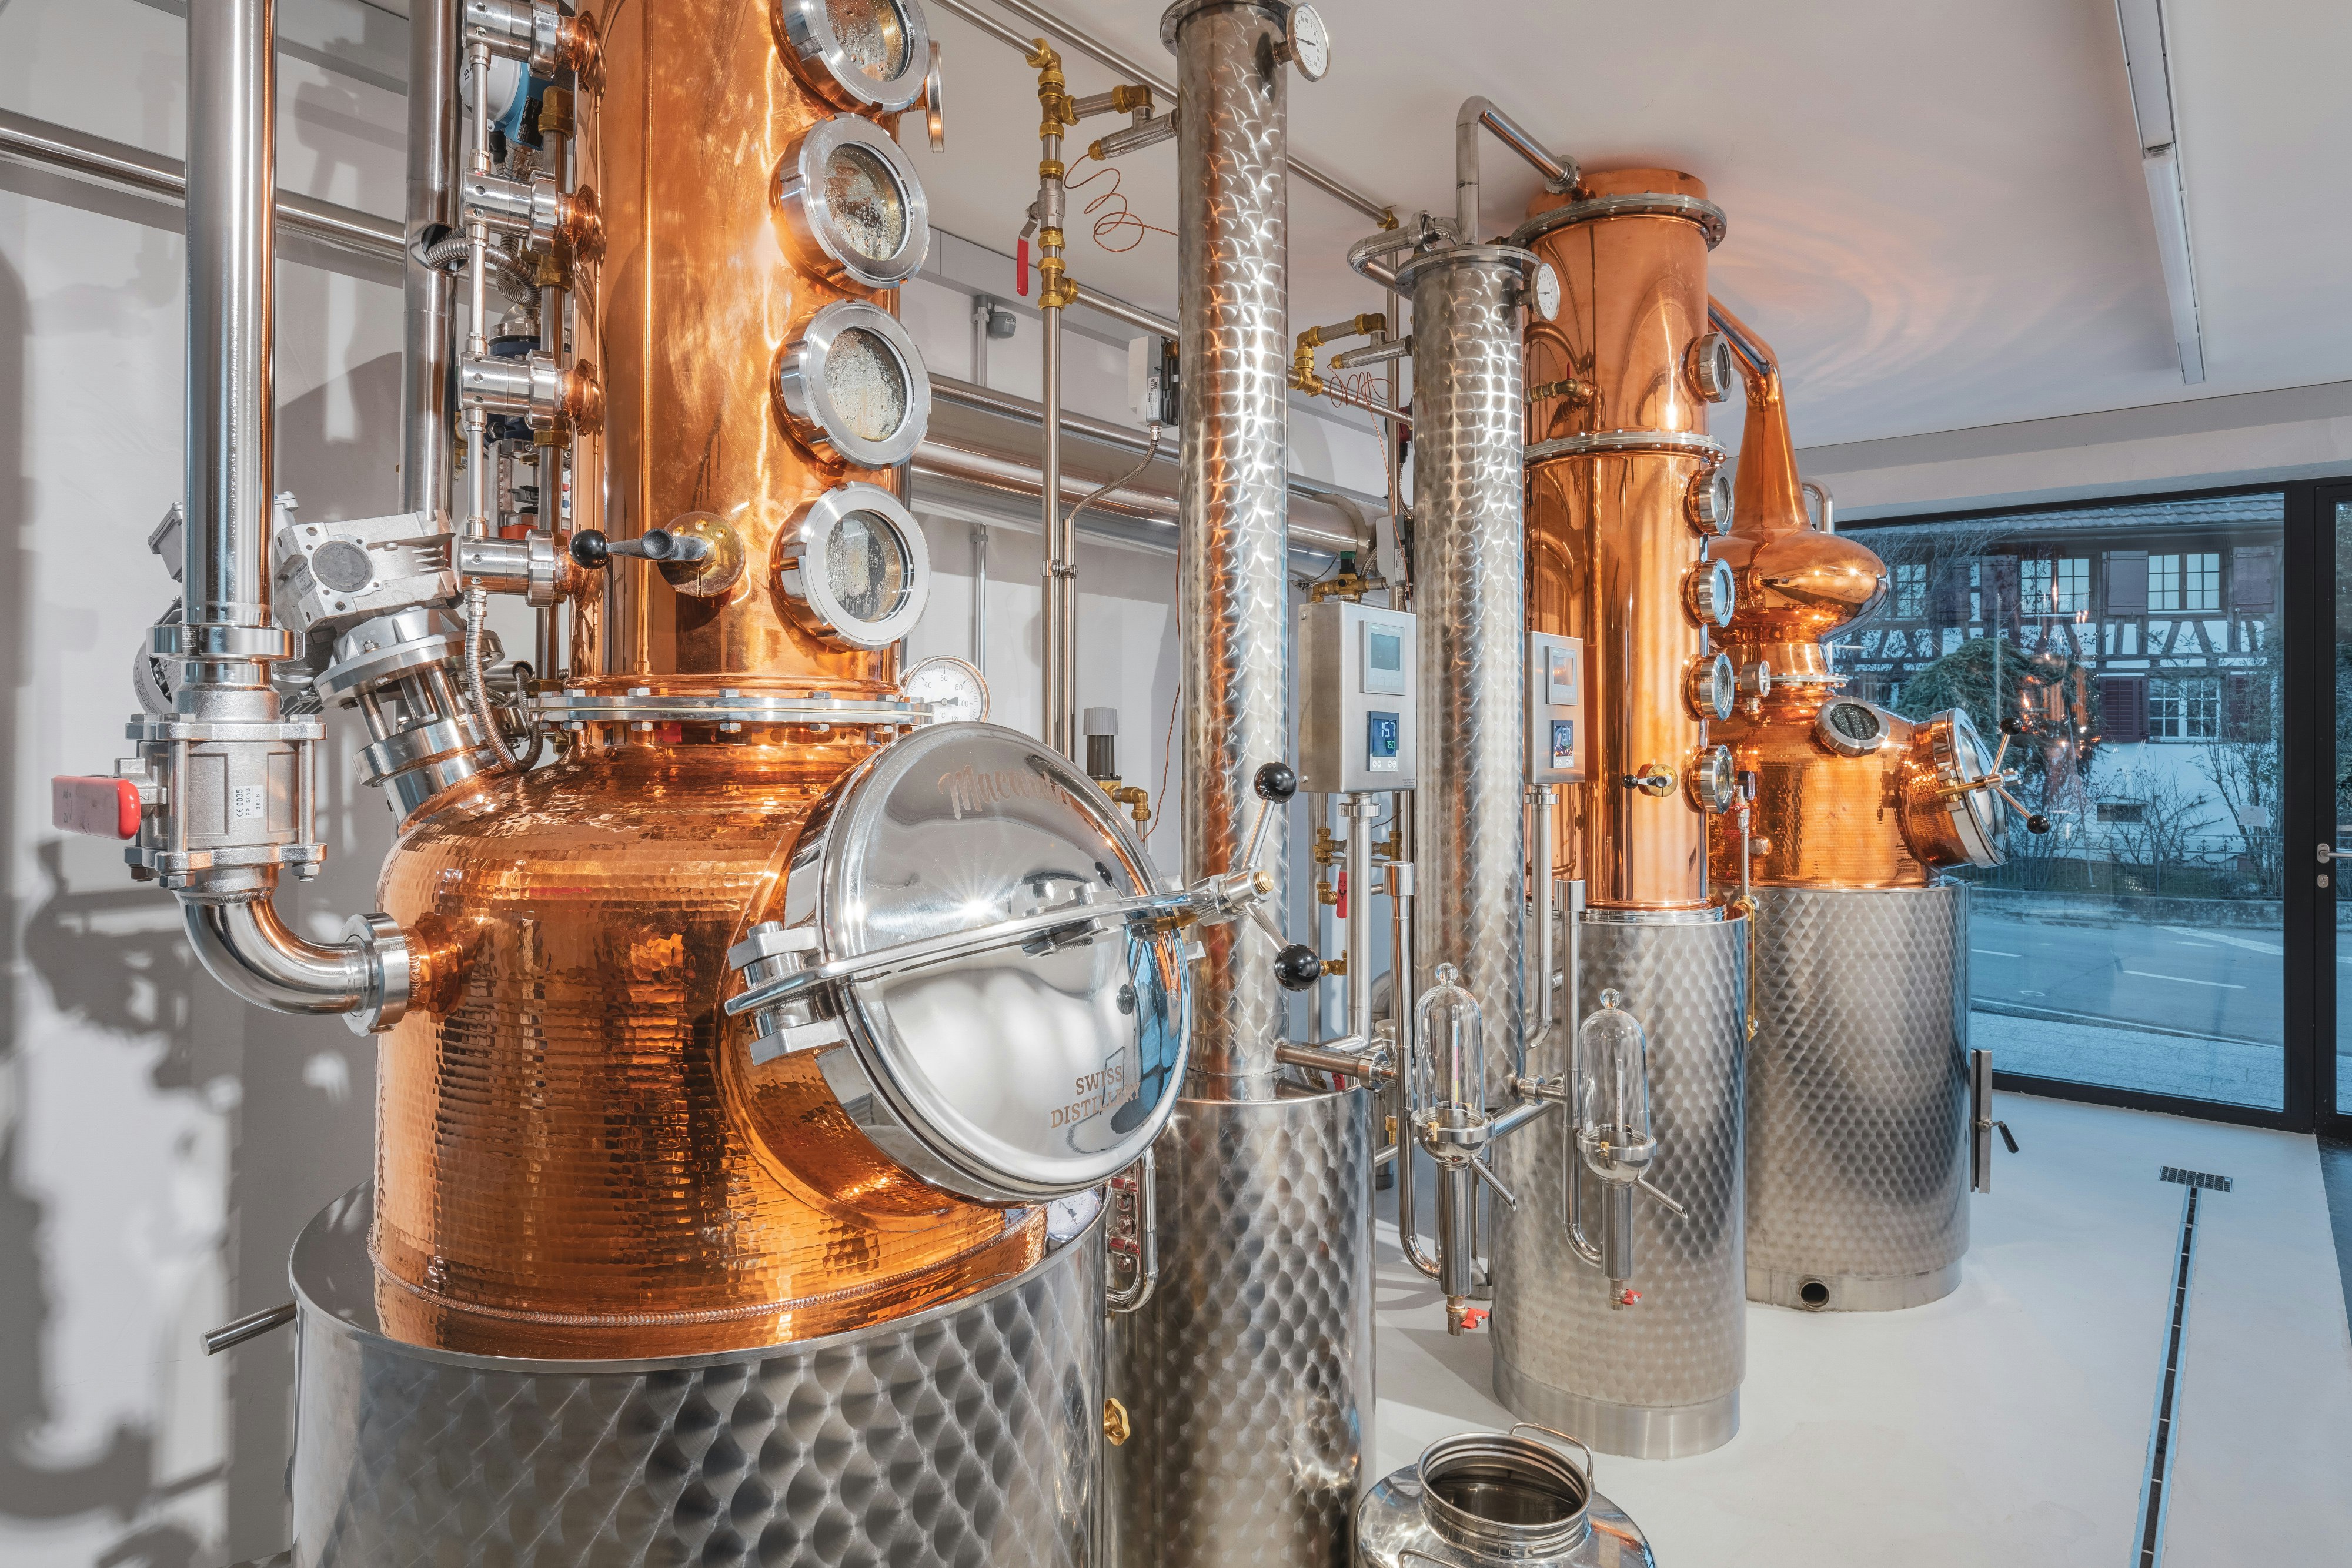 Guided tour of the Macardo Swiss Distillery